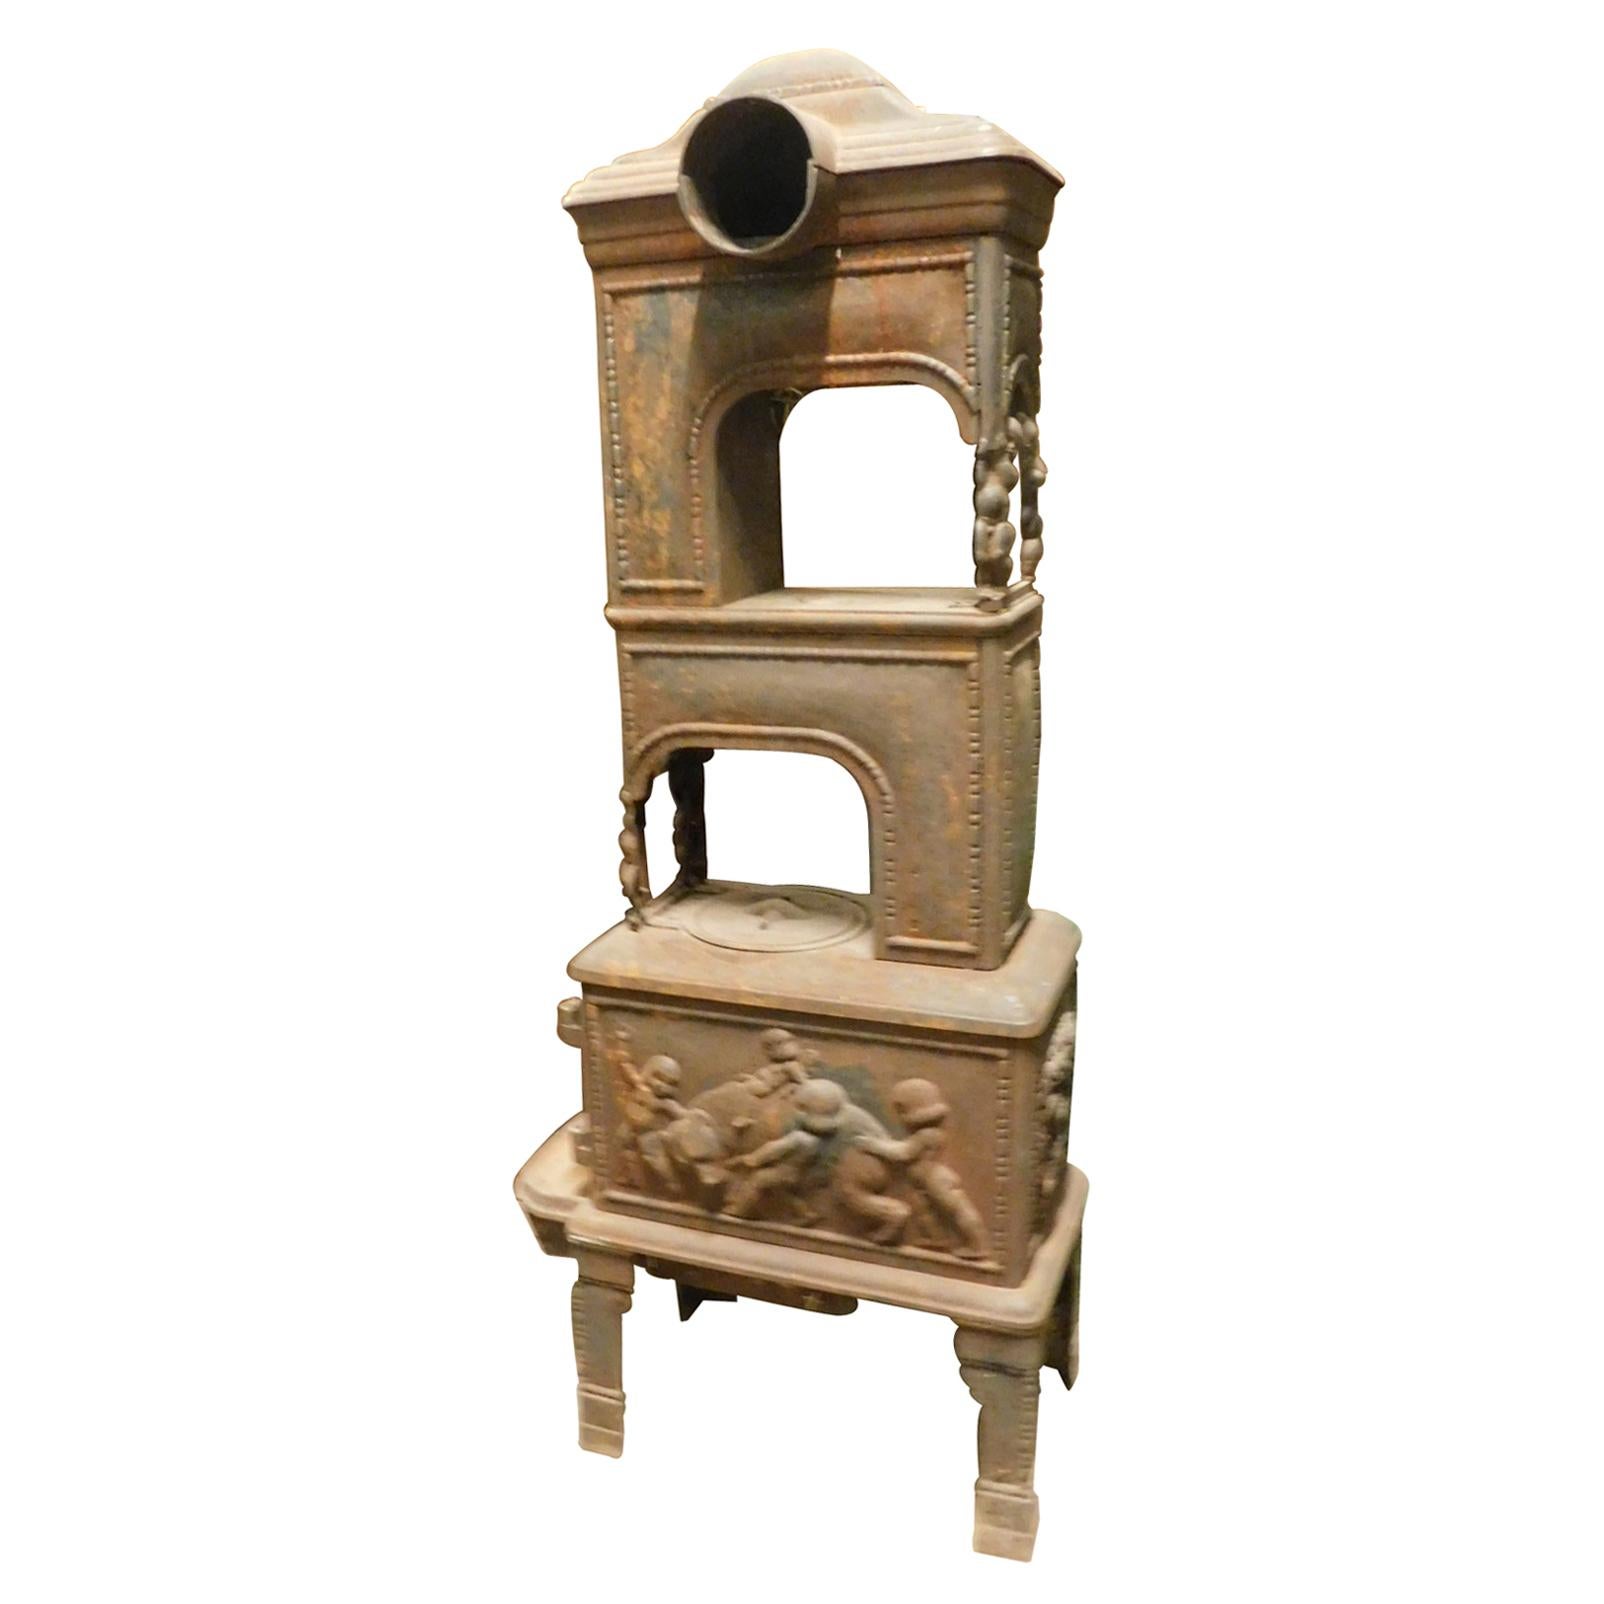 Antique Stove in Cast Iron, Wood-Burning, Decor on All Sides Cherubs, 1800